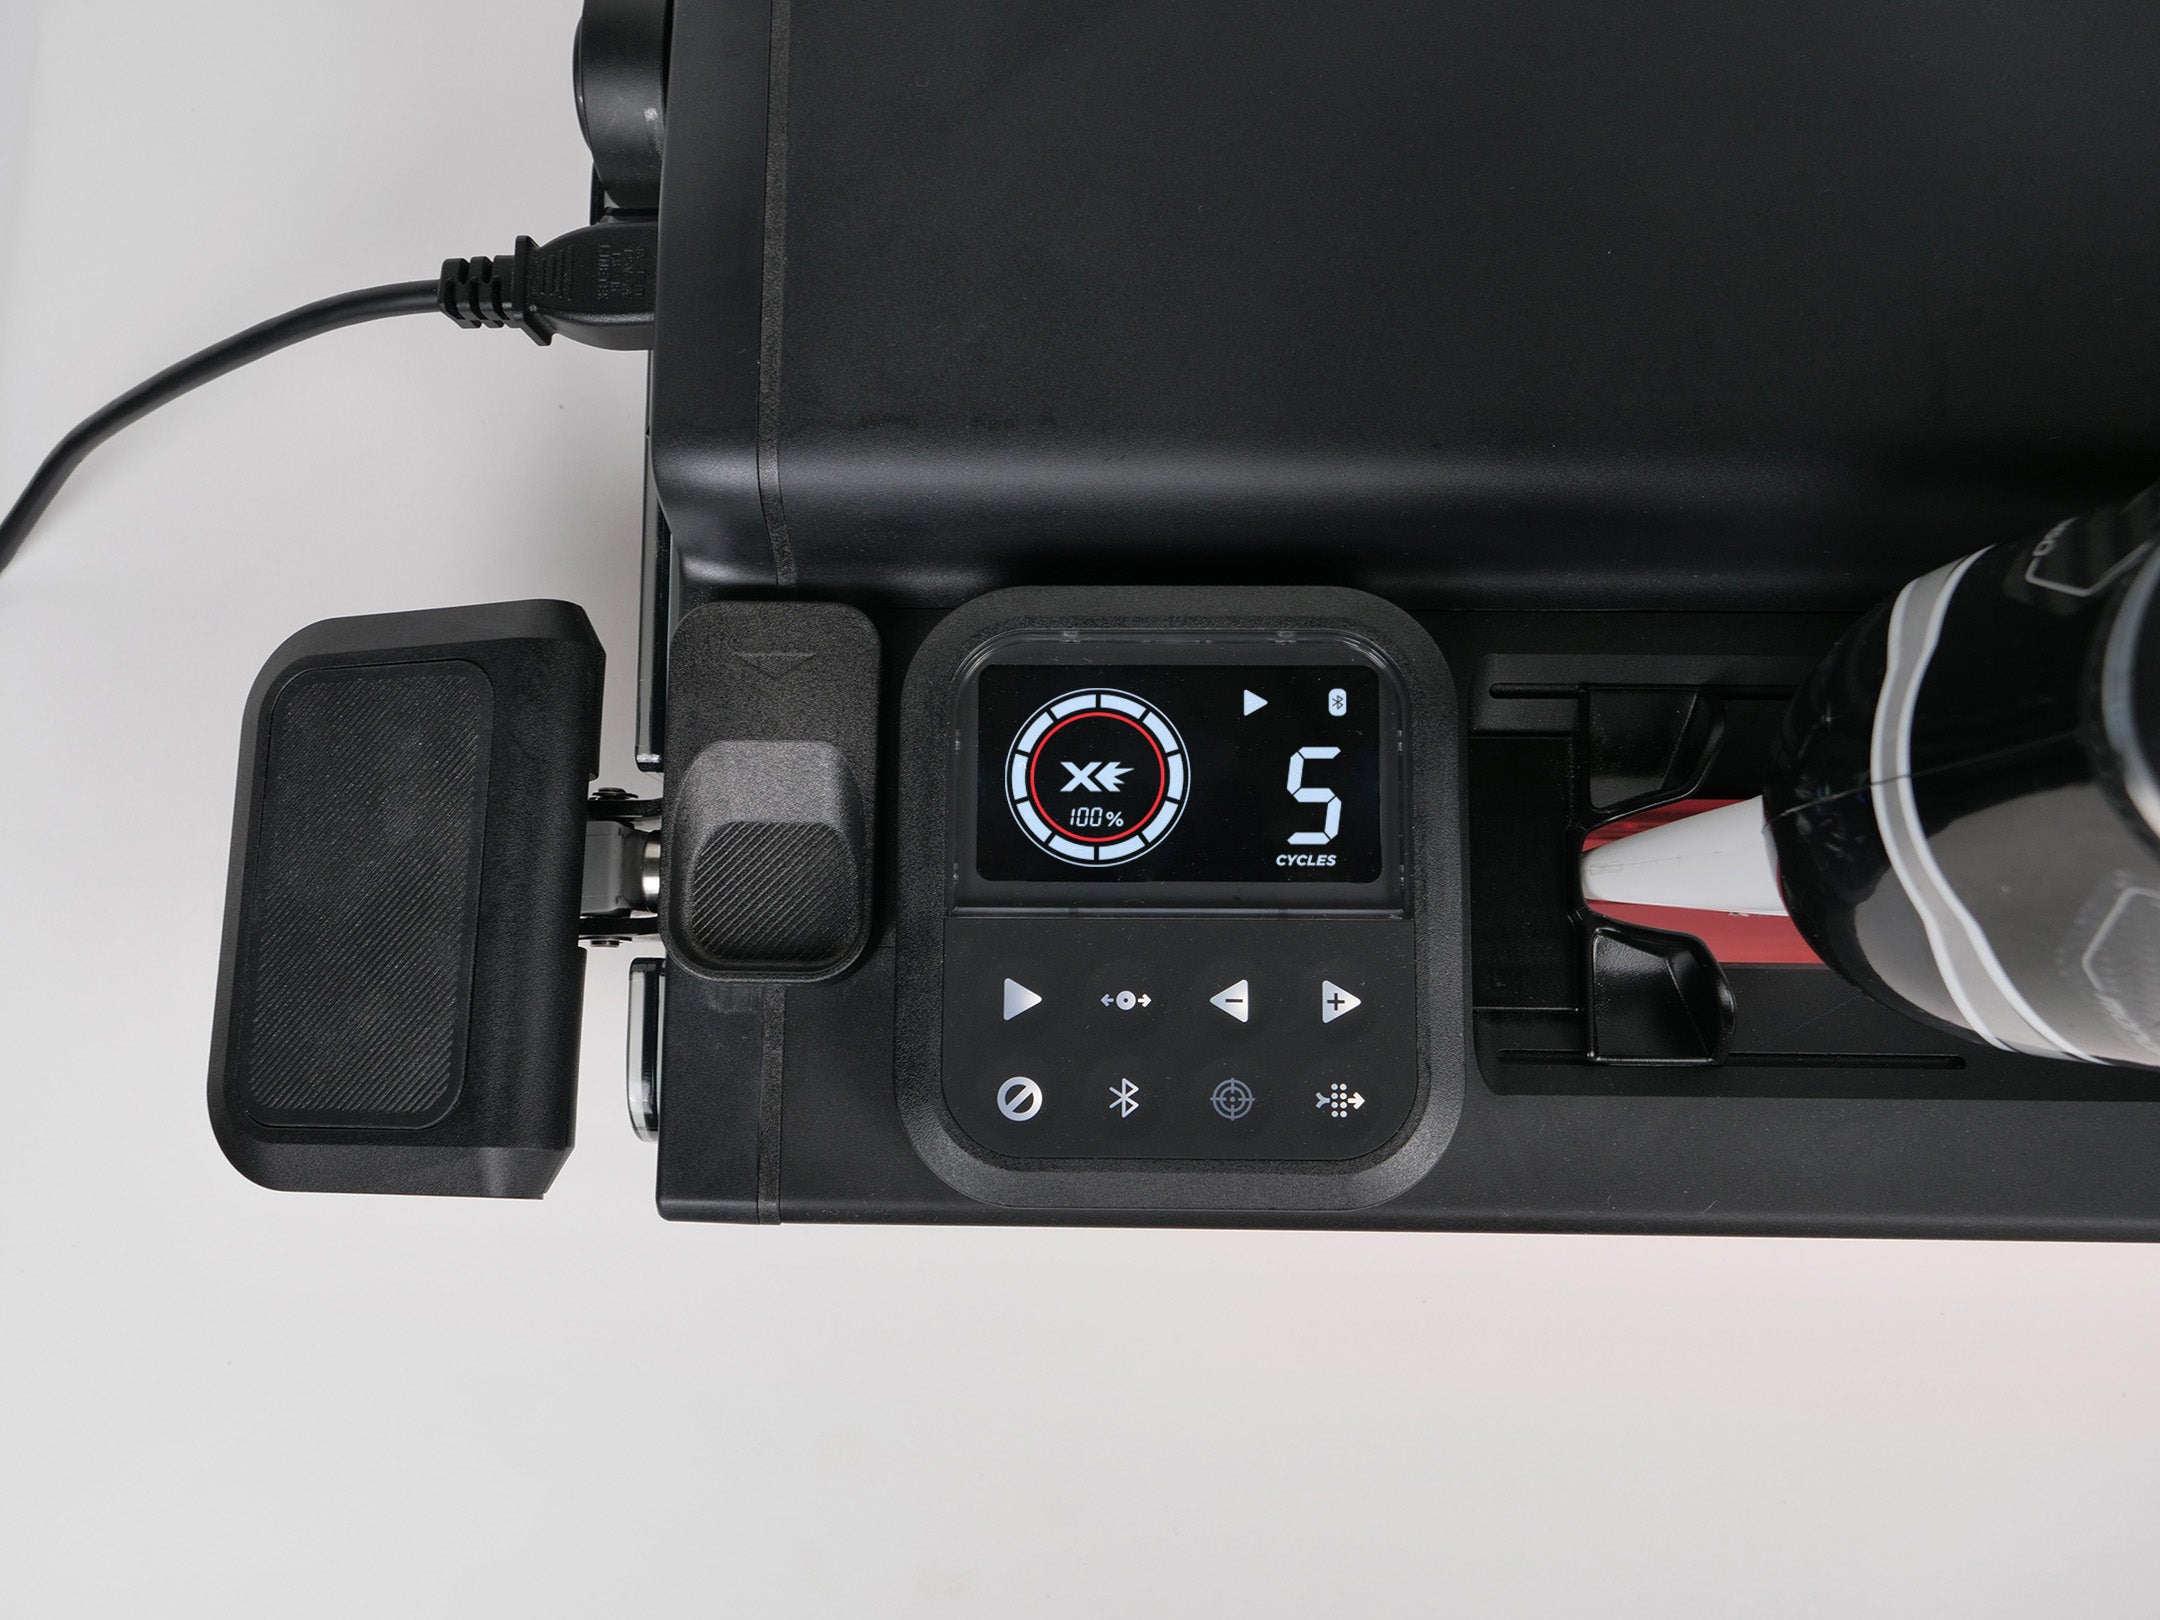 Picture of Sparx skate sharpener focused on the LCD Multi Function display.